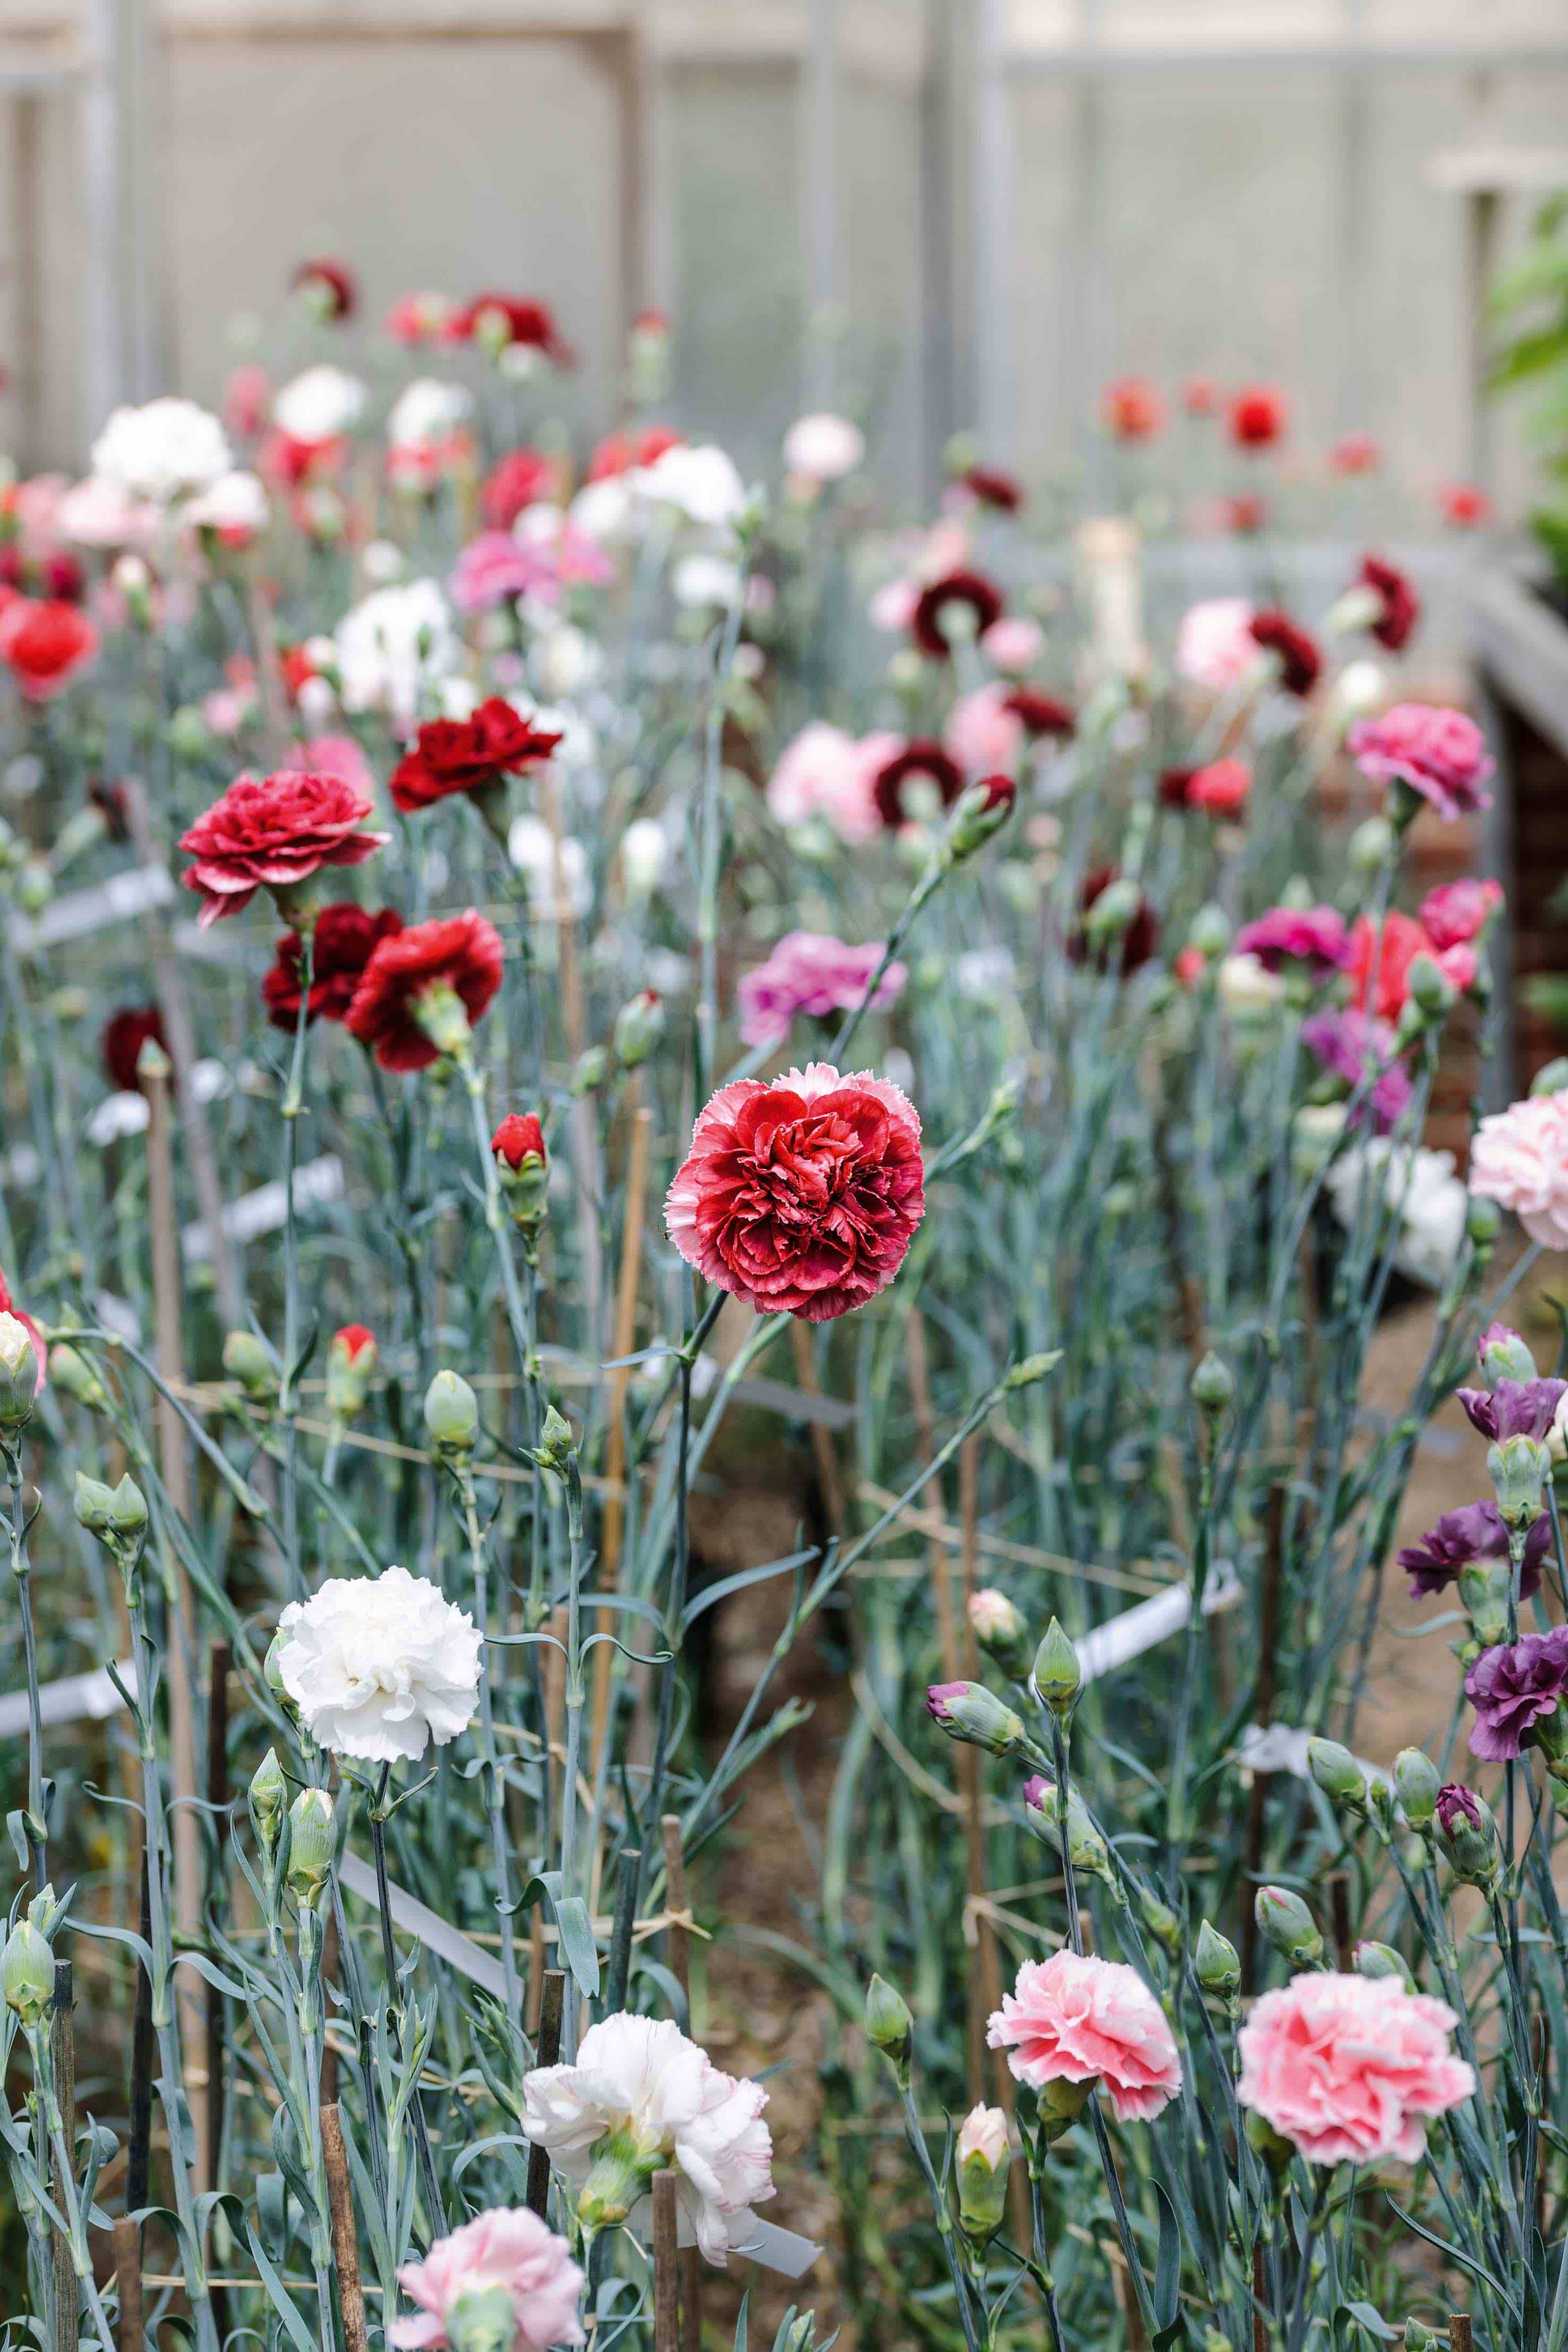 Carnations: Plant Care and Growing Guide